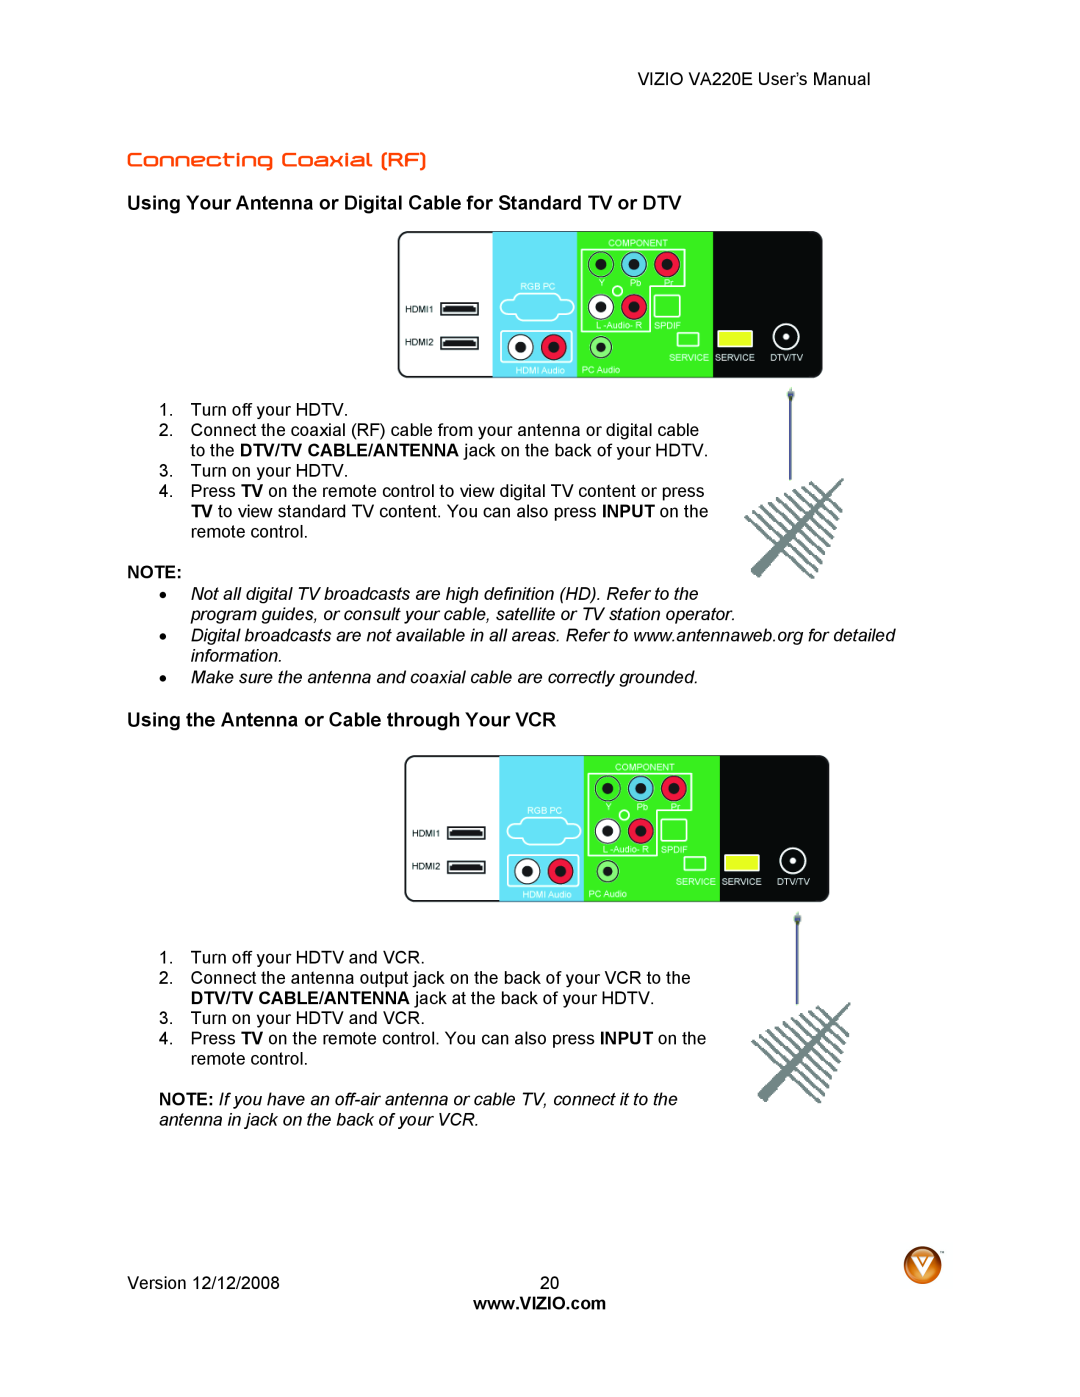 Vizio VA220E user manual Connecting Coaxial RF, Using Your Antenna or Digital Cable for Standard TV or DTV 